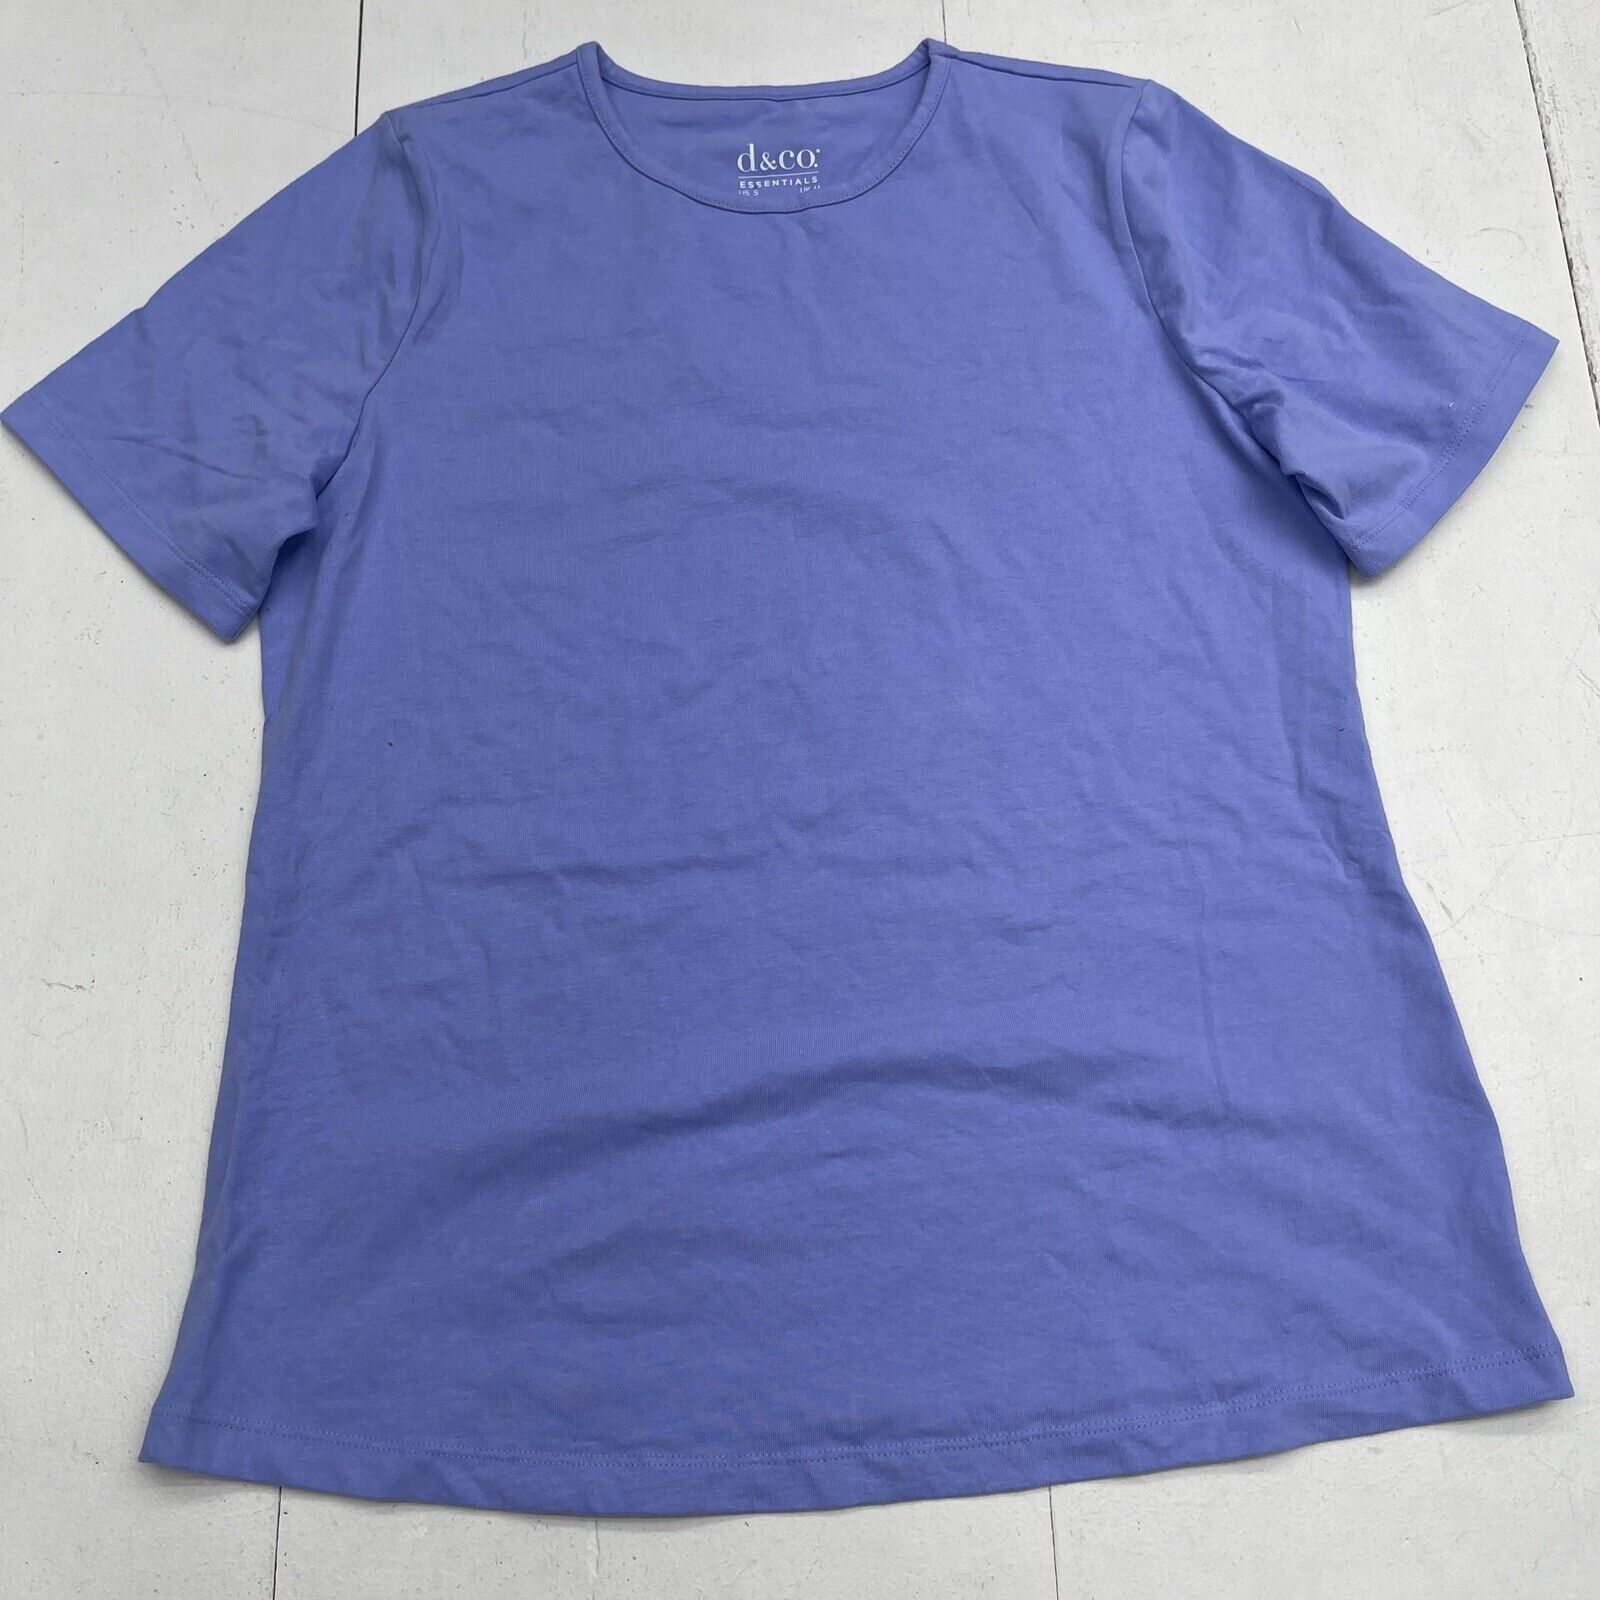 D&Co Womens Blue Short Sleeve Shirt Size Small - beyond exchange